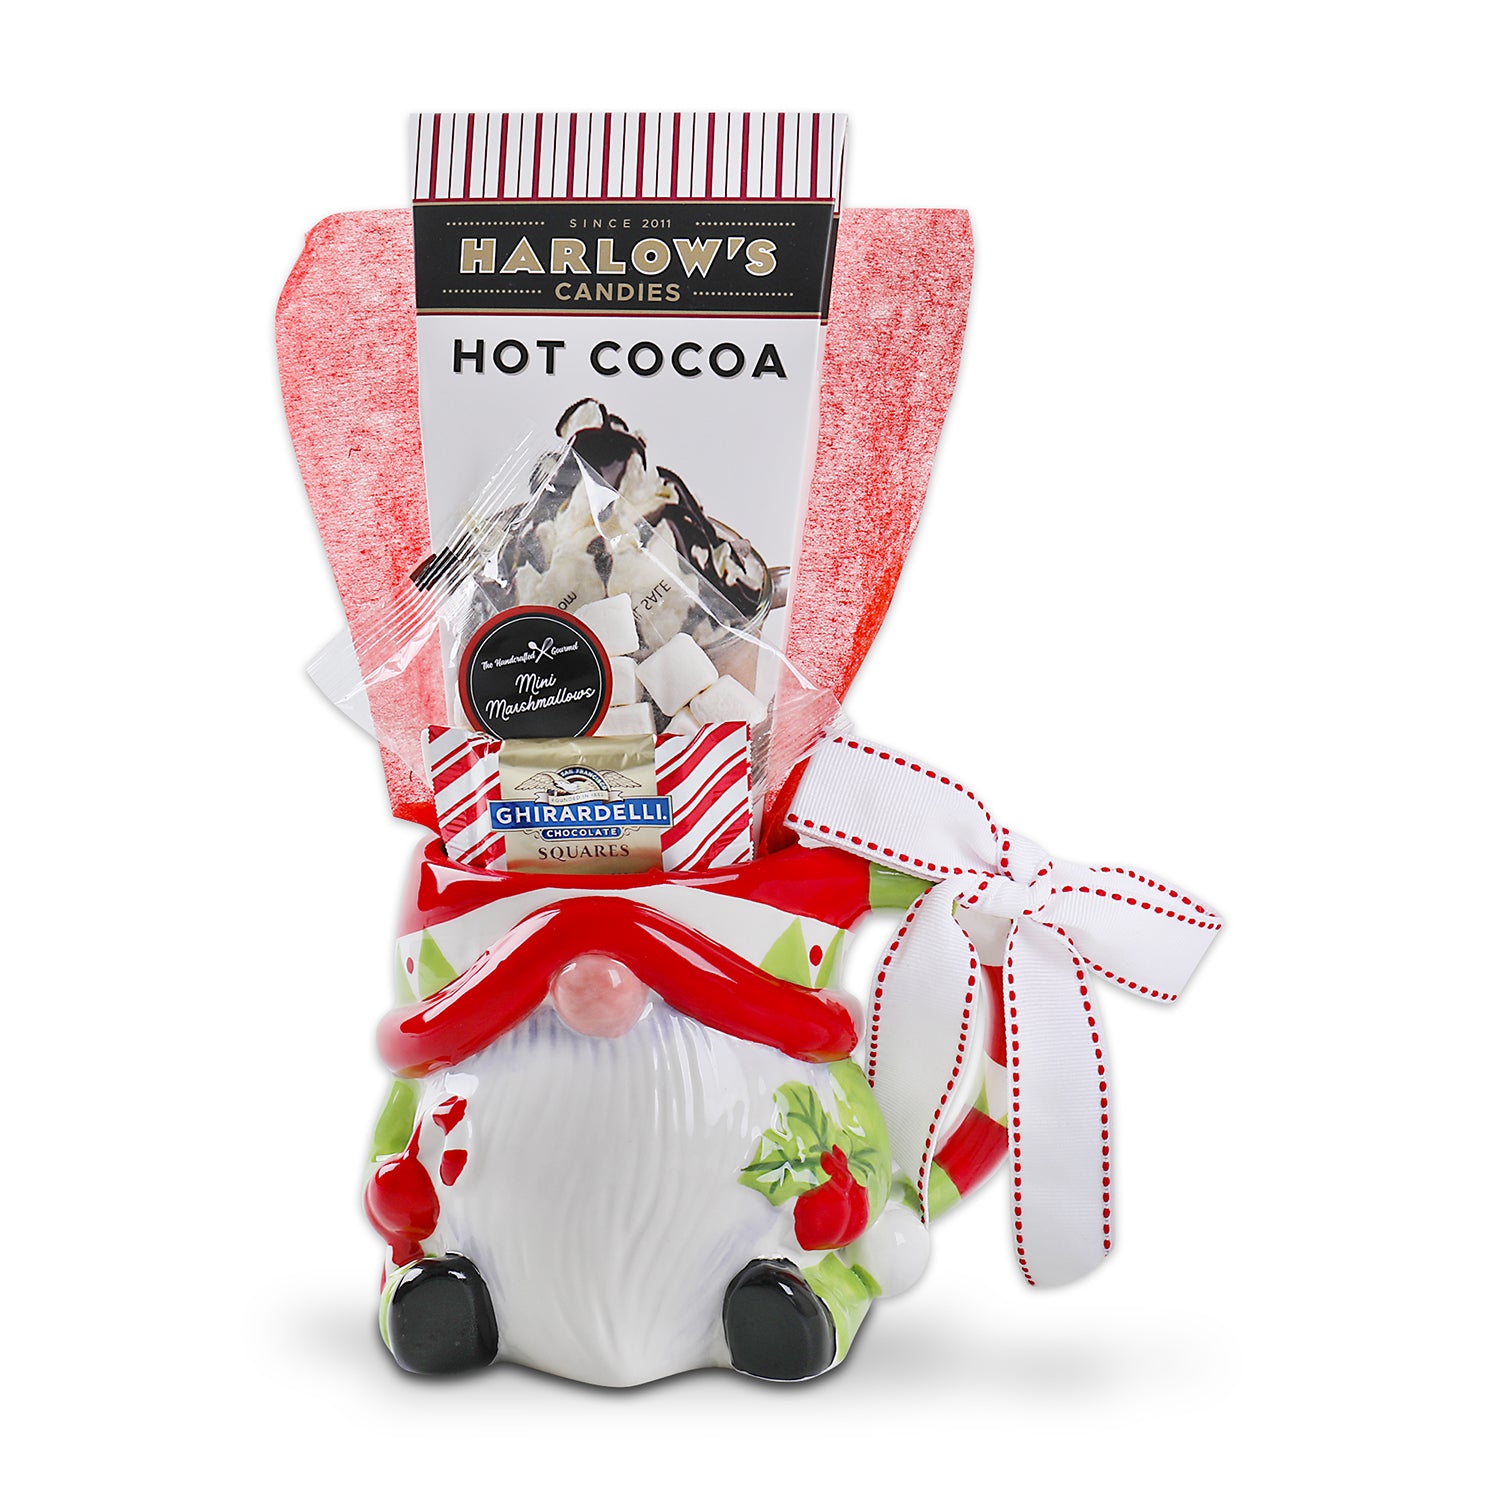 Harlow’s Hot Cocoa Drink Mix (1pc), Ghirardelli Peppermint Bark Tasting Square (.405oz), Marshmallow Bag (1oz),  in a red and green Ceramic Gnome Mug